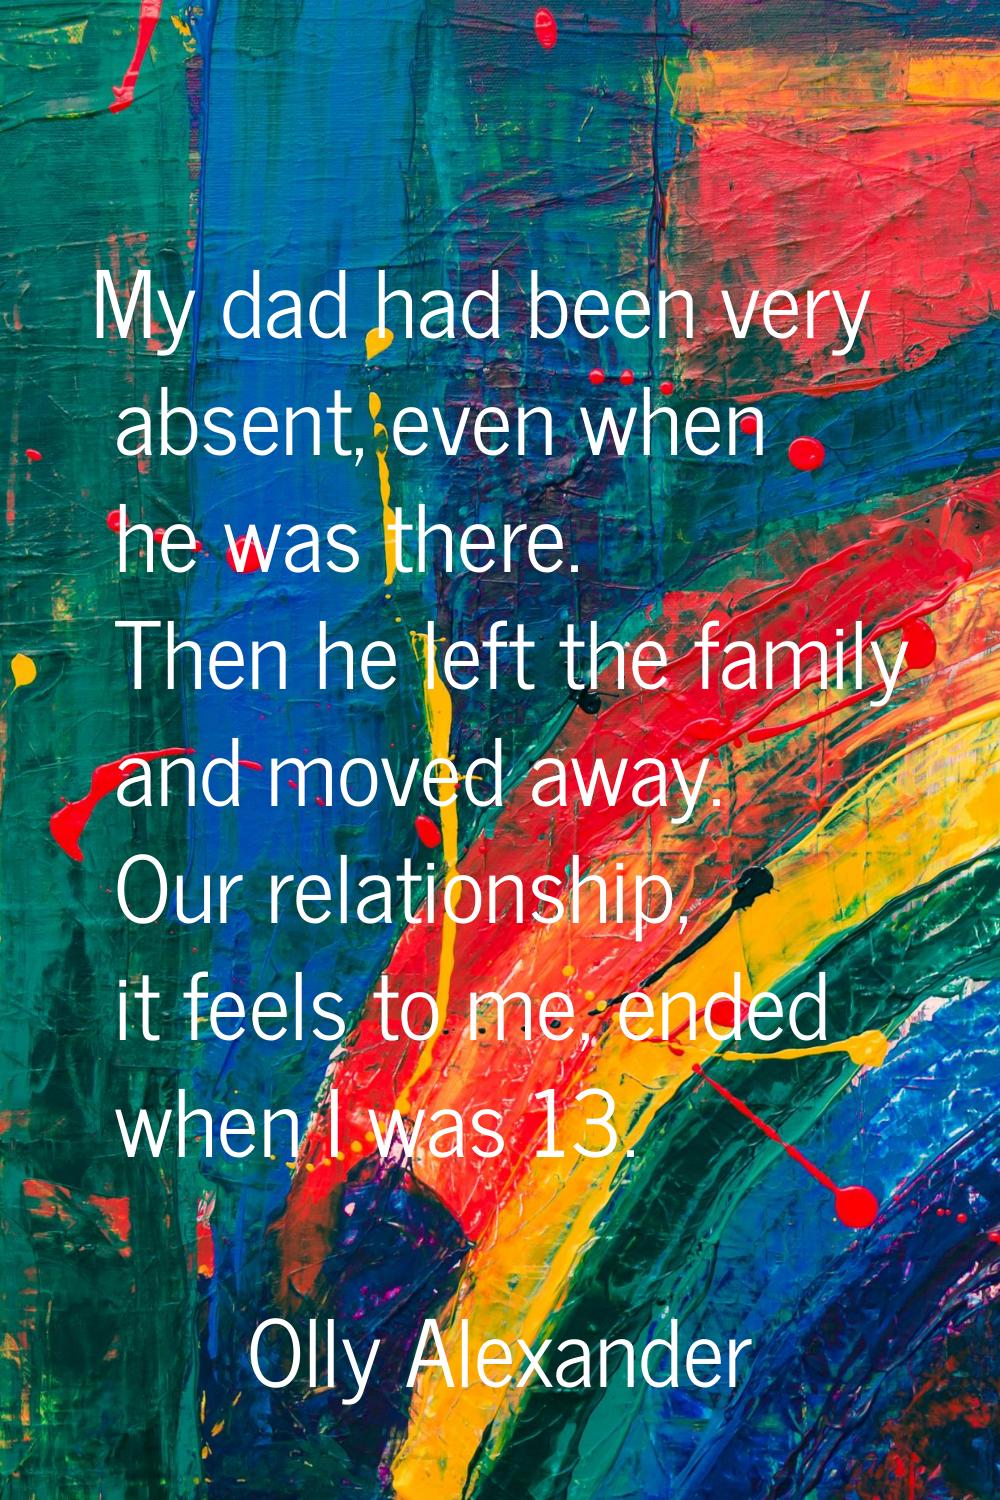 My dad had been very absent, even when he was there. Then he left the family and moved away. Our re